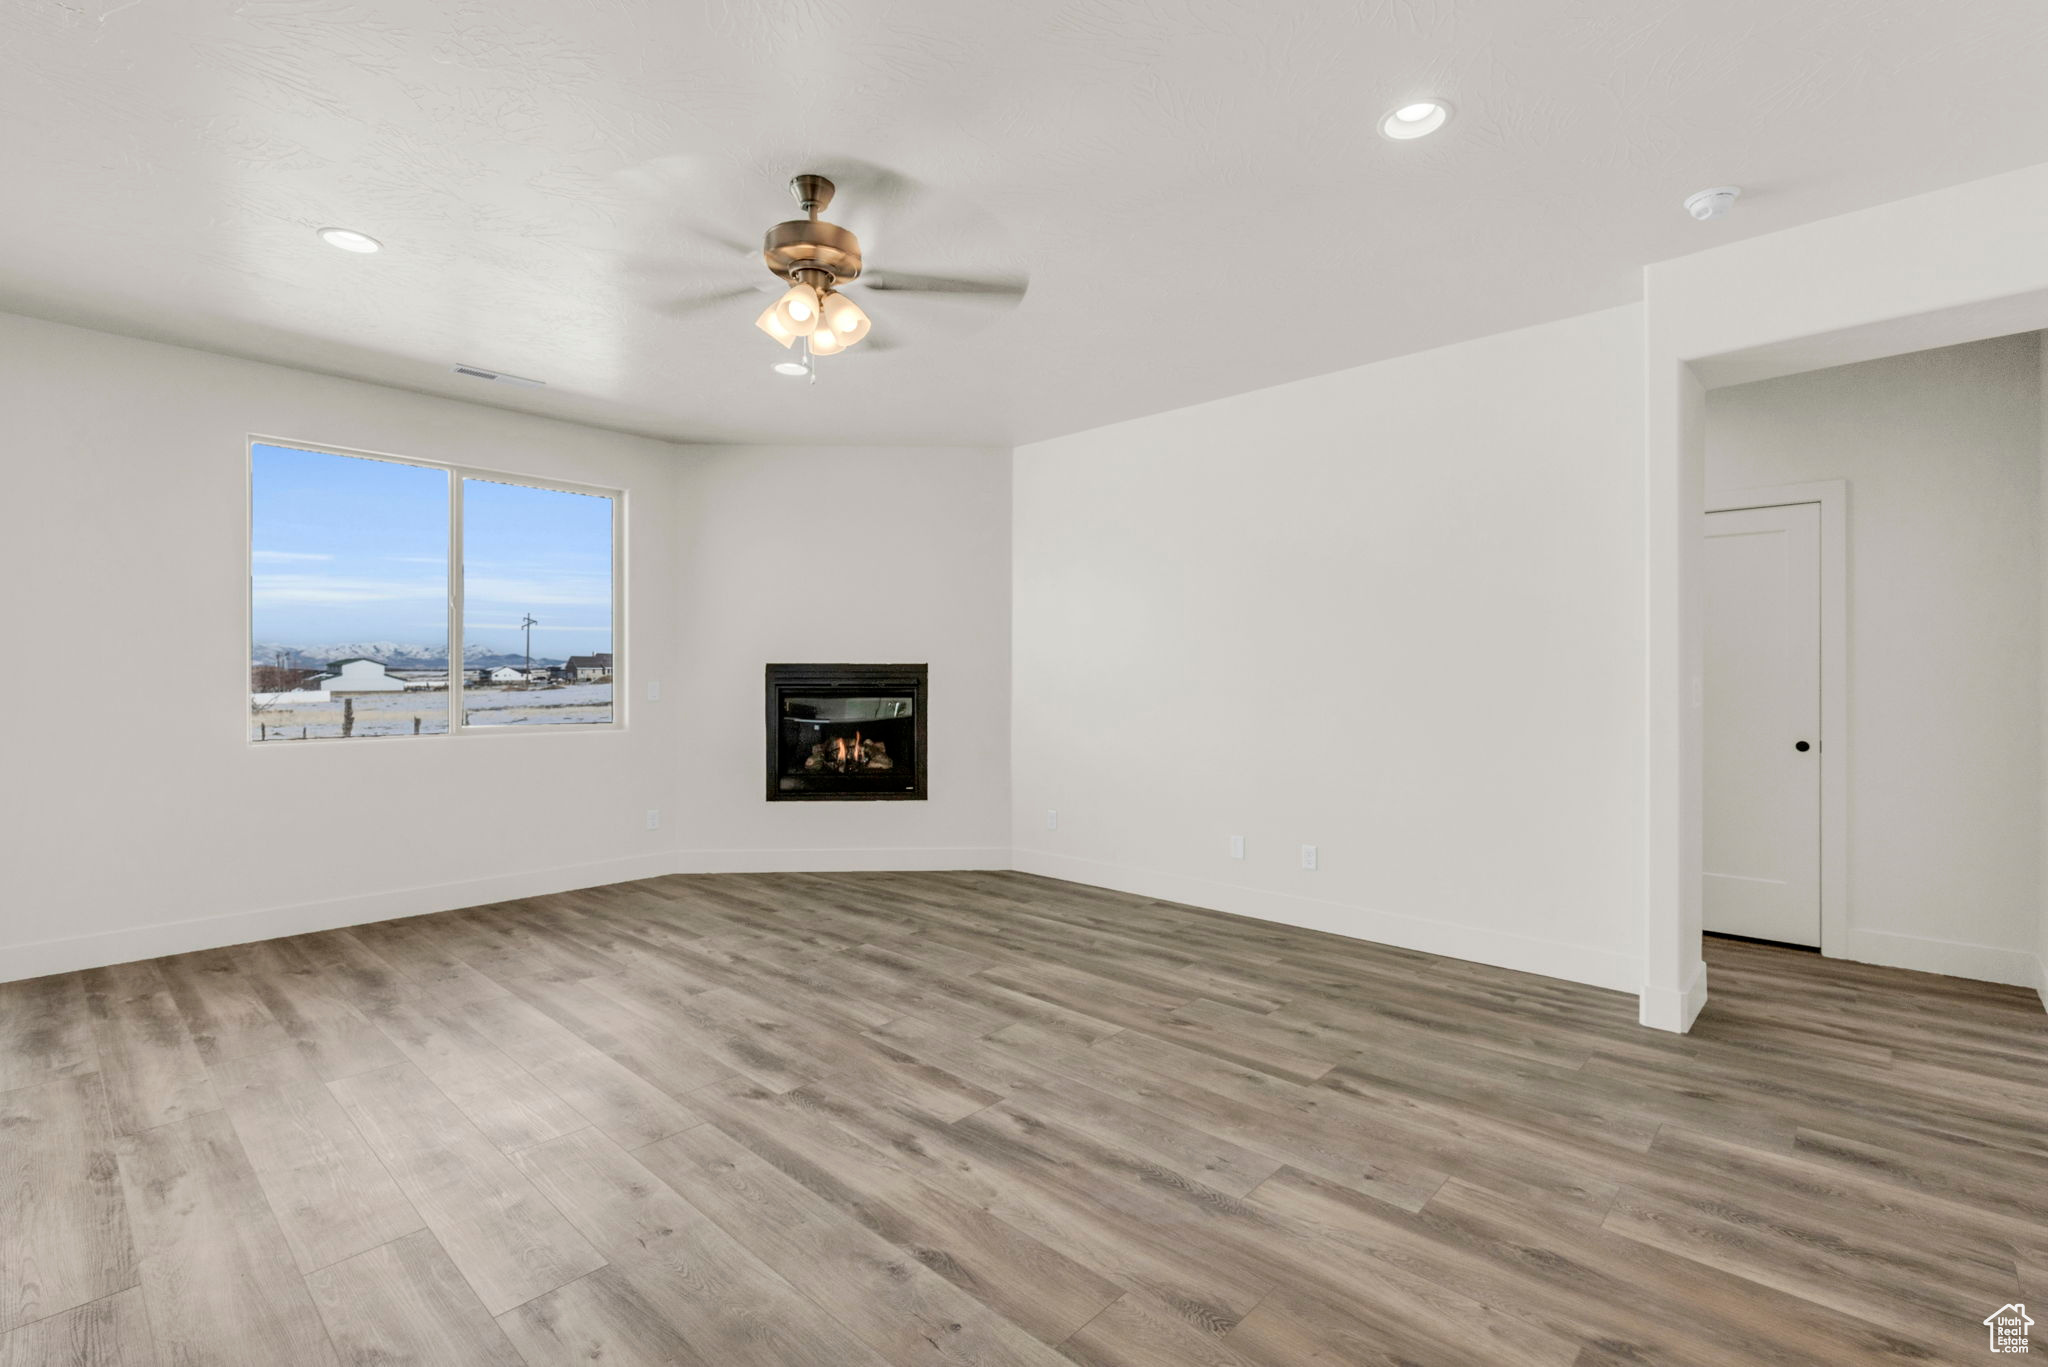 Unfurnished living room with light hardwood / wood-style floors and ceiling fan